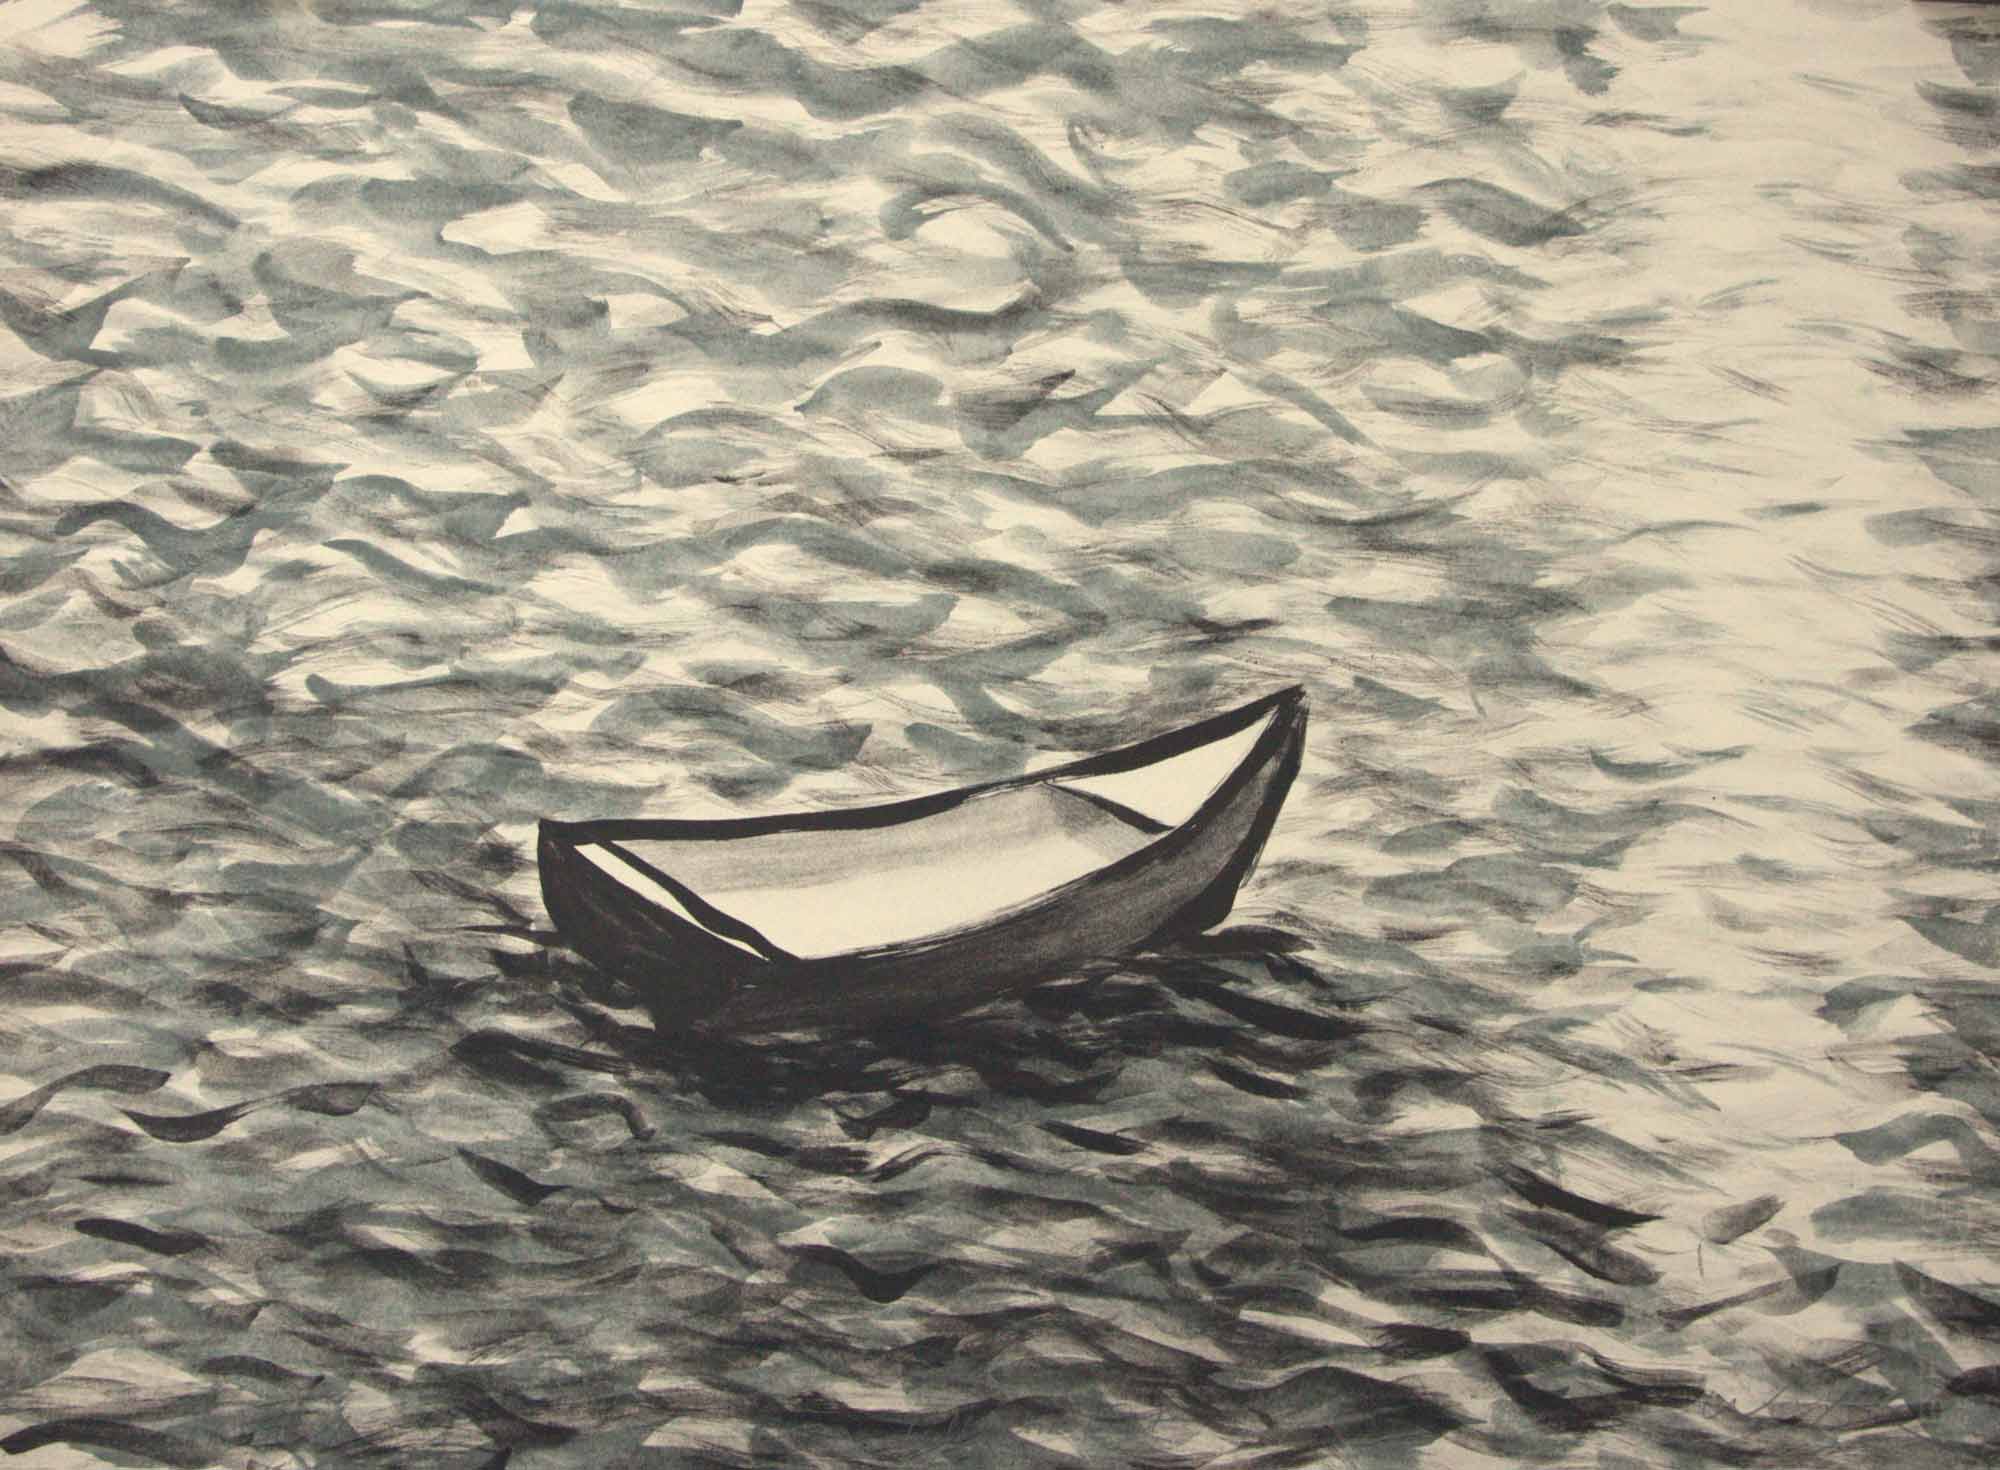 <em>Moon in a Boat</em>, 2000. Lithography, 22 x 30 in. (56 x 76 cm)